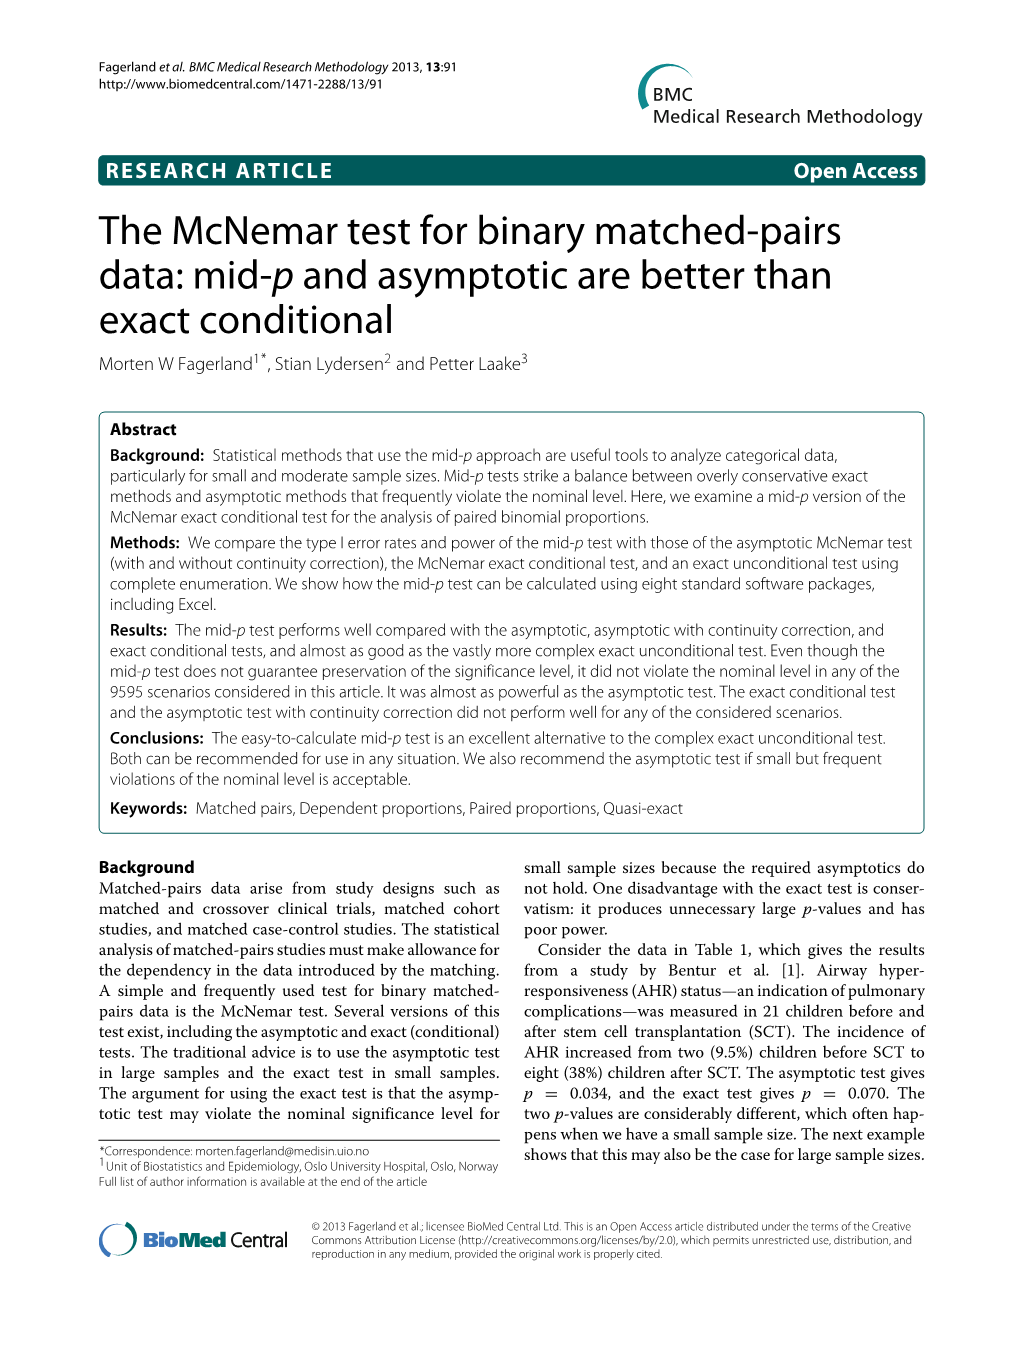 The Mcnemar Test for Binary Matched-Pairs Data: Mid-P and Asymptotic Are Better Than Exact Conditional Morten W Fagerland1*, Stian Lydersen2 and Petter Laake3